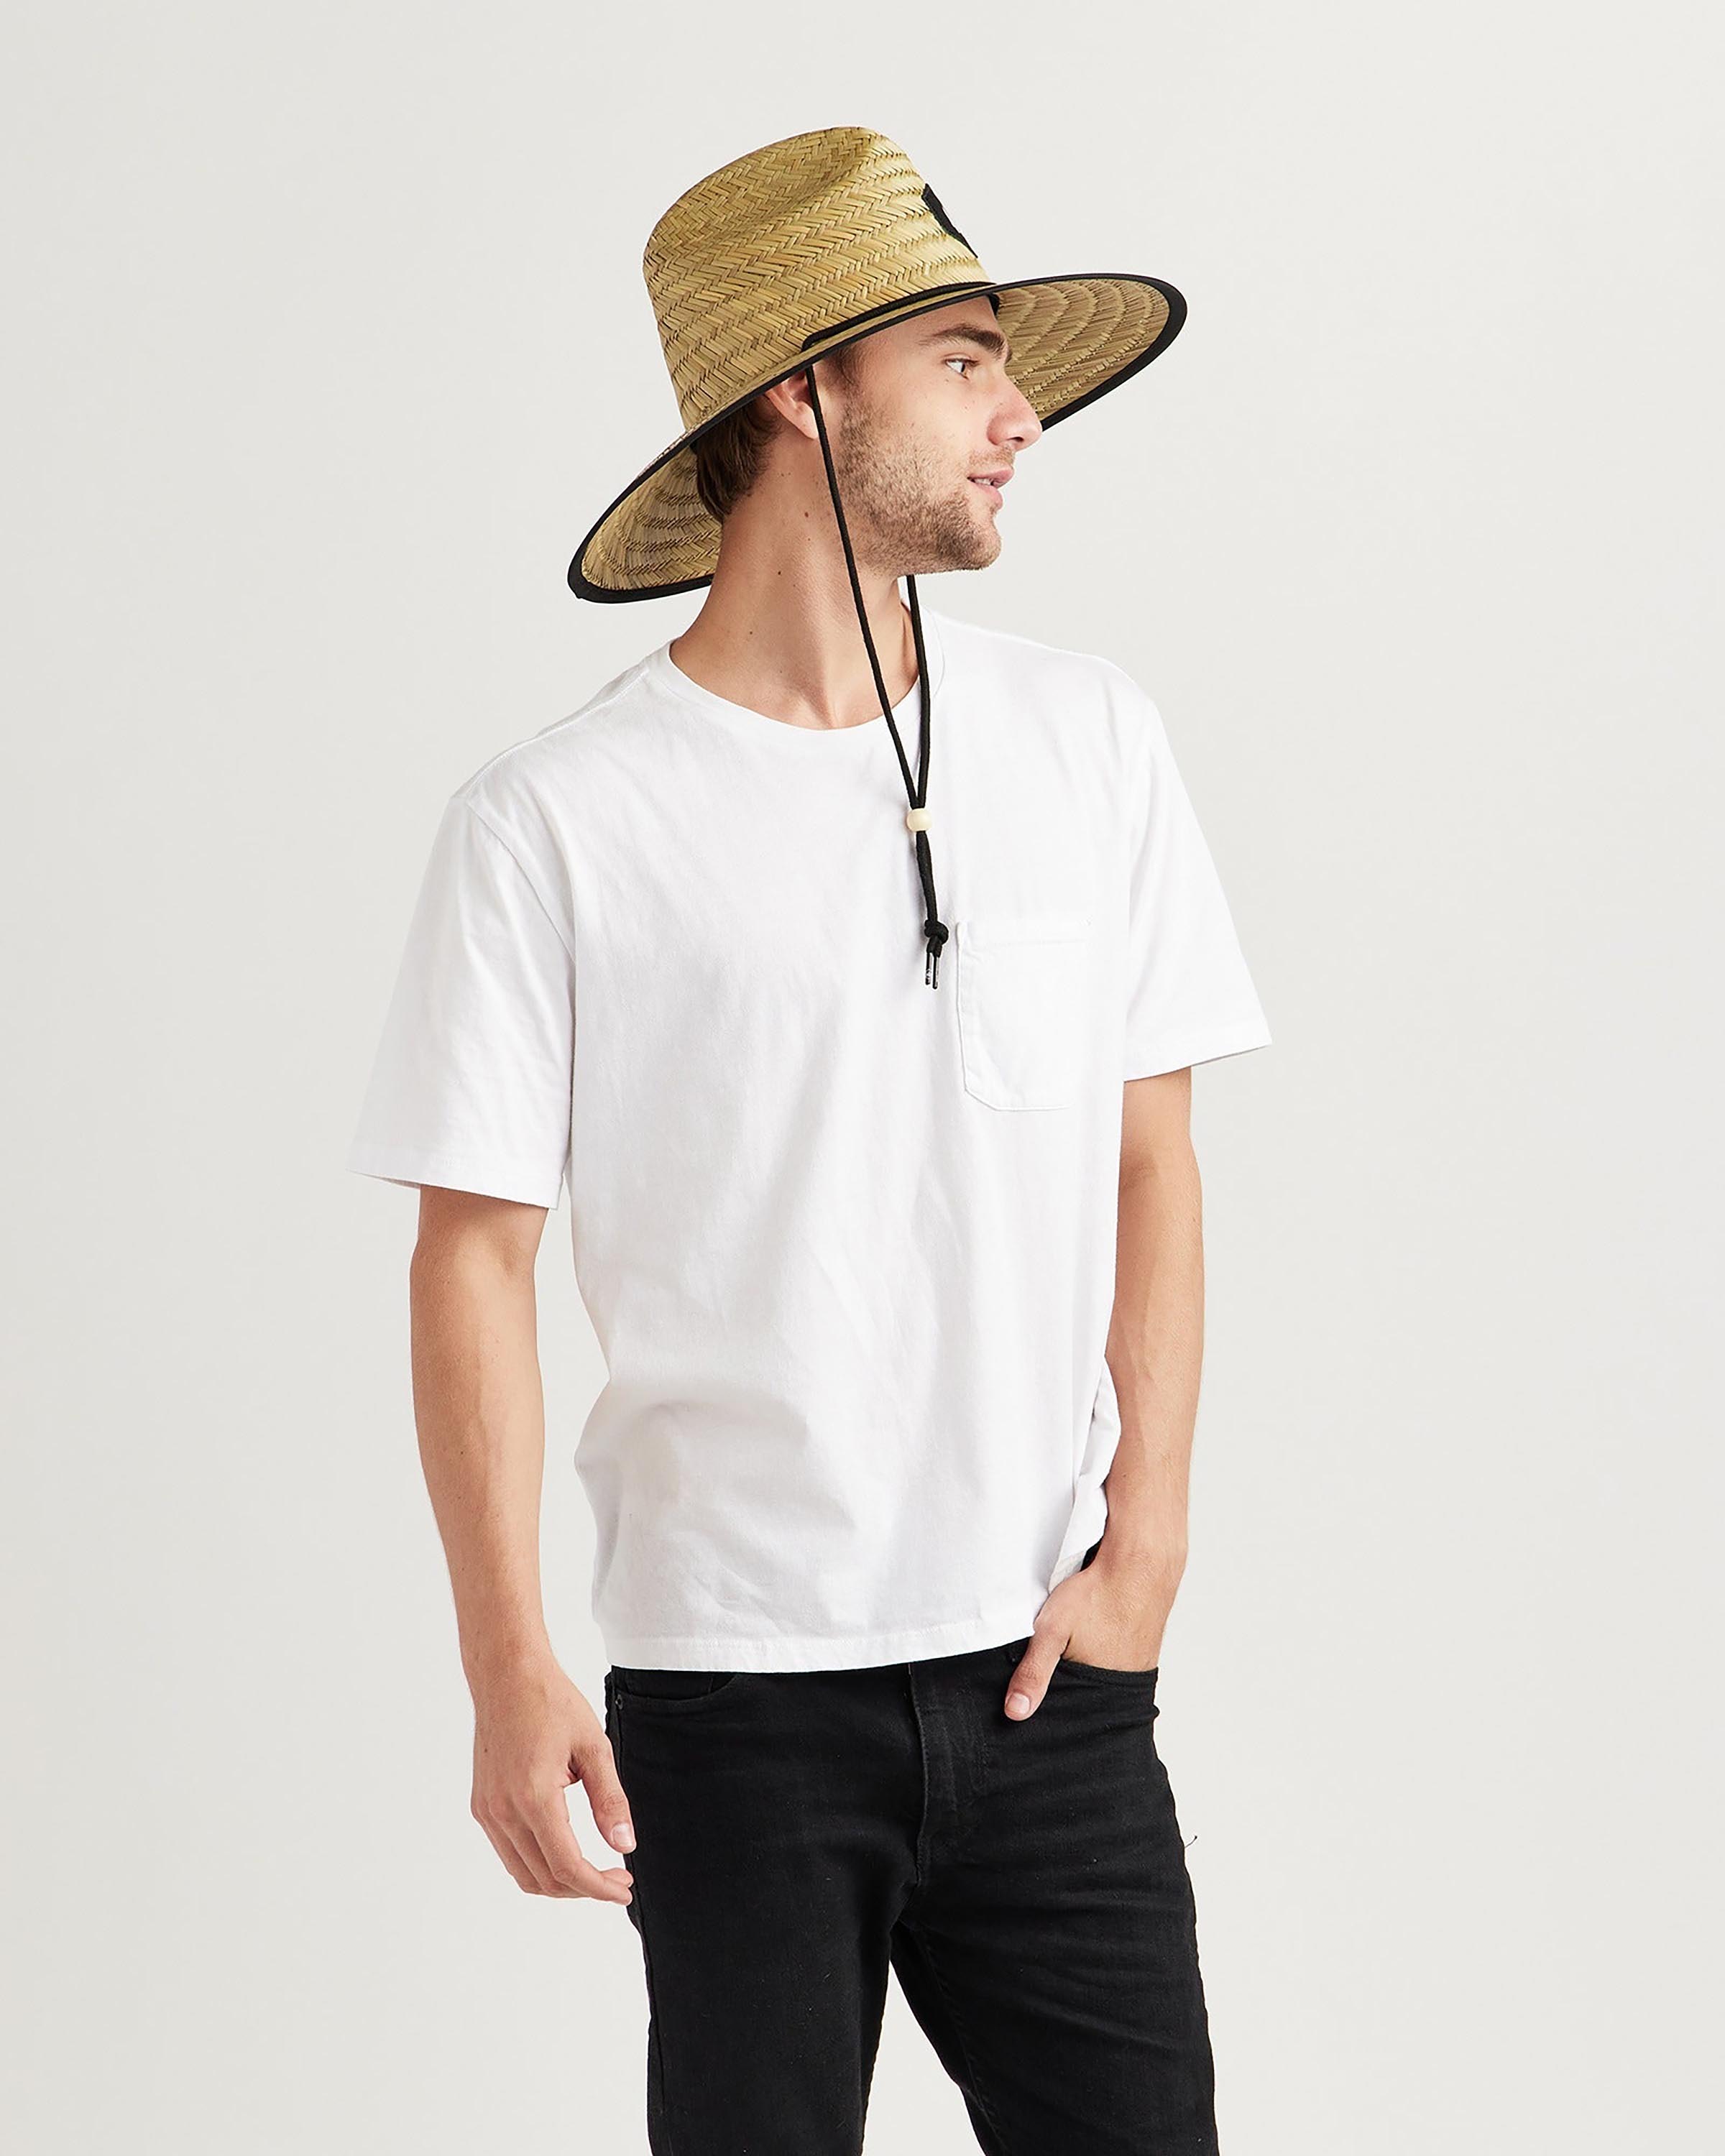 Hemlock male model looking right wearing Midnight straw lifeguard hat with black color